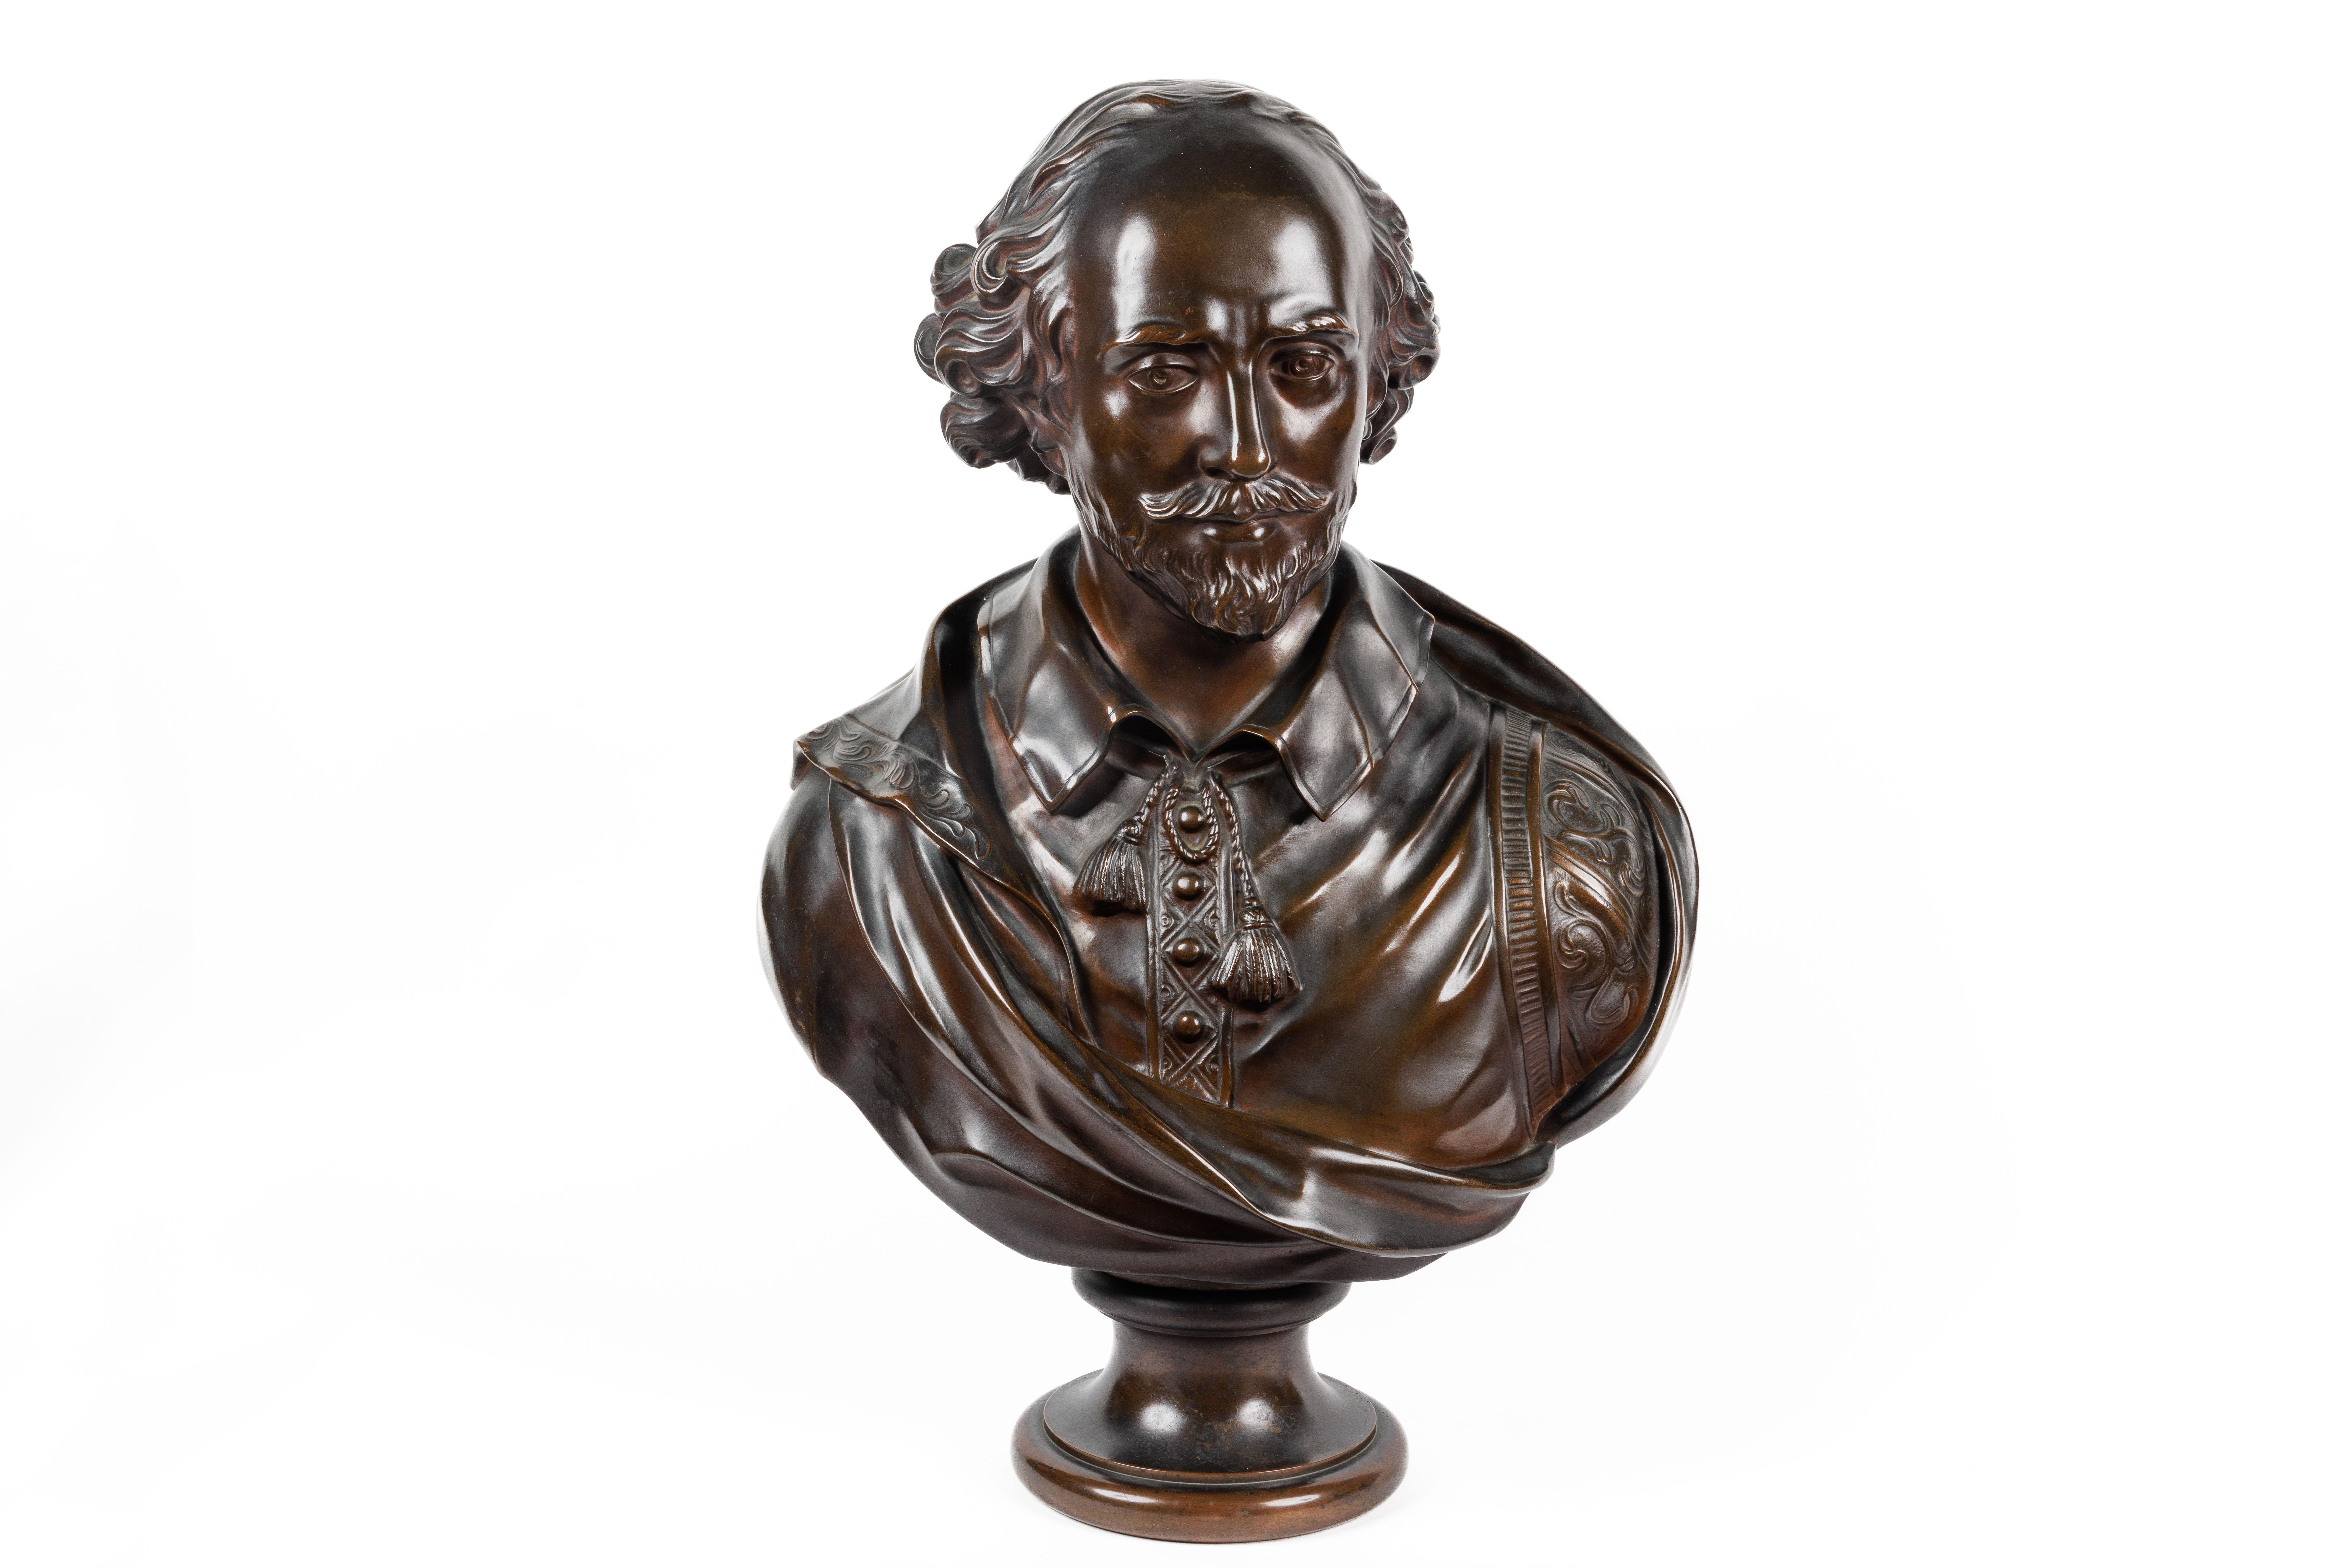 A Monumental French Patinated Bronze Bust of William Shakespeare, after Houdon - Sculpture by F. Barbedienne Foundry